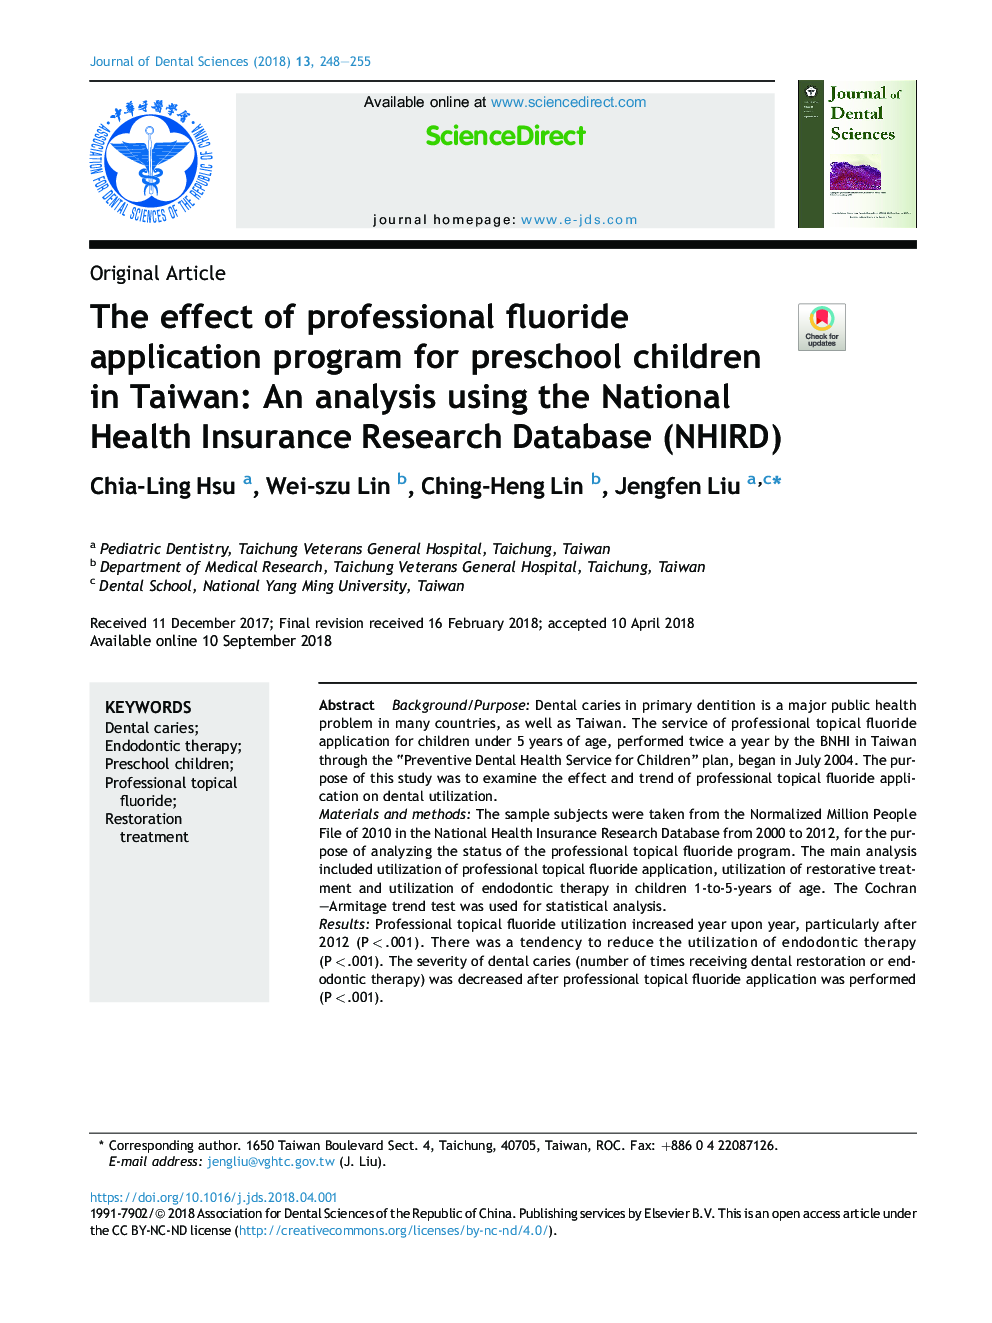 The effect of professional fluoride application program for preschool children in Taiwan: An analysis using the National Health Insurance Research Database (NHIRD)